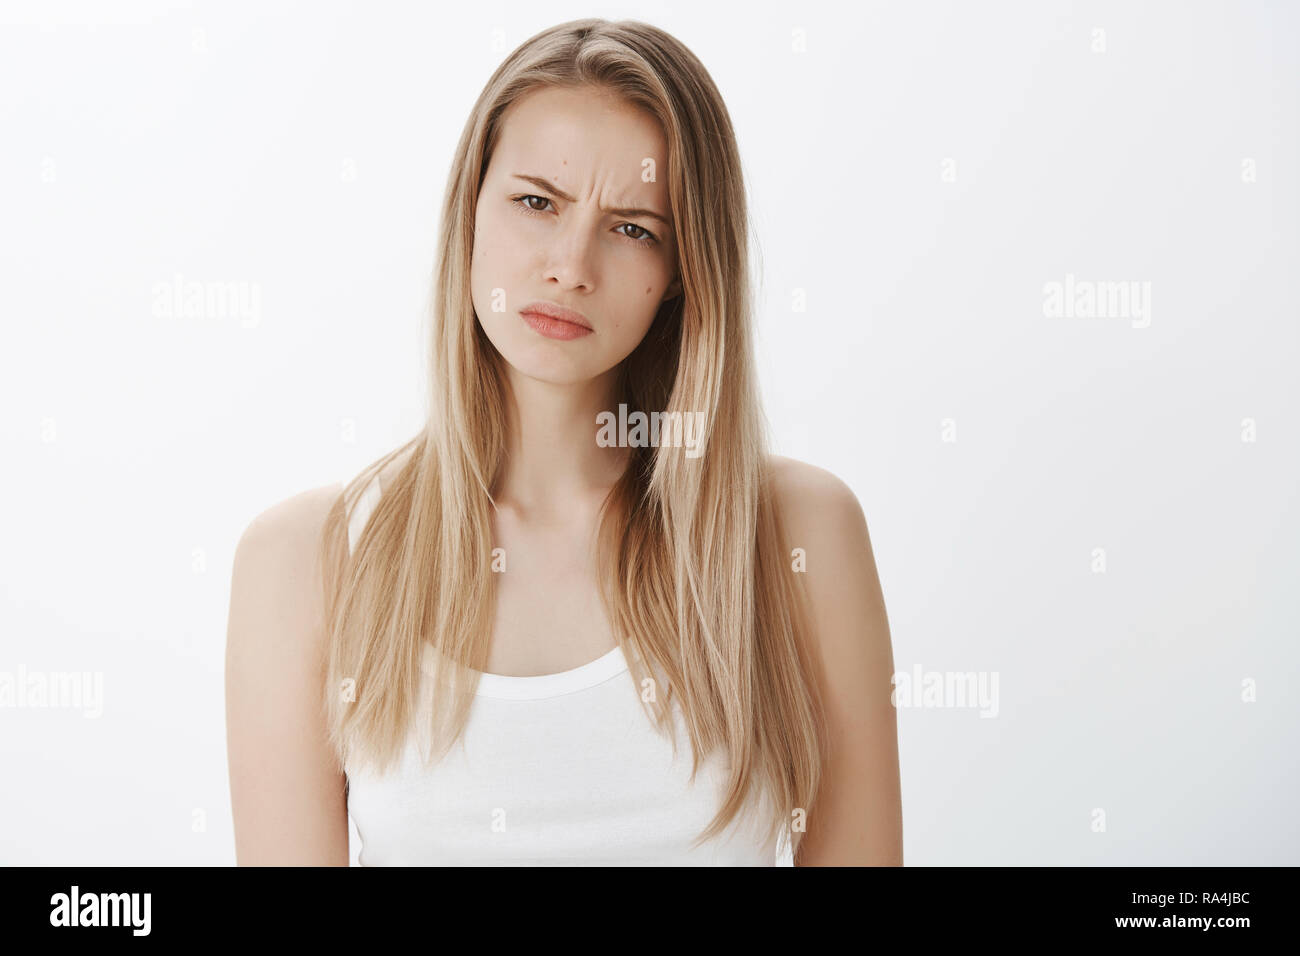 Girl suspects something wrong being doubtful in friend telling whole truth, squinting suspicious at camera as frowning and making hesitant face, standing questioned and intense over gray wall Stock Photo